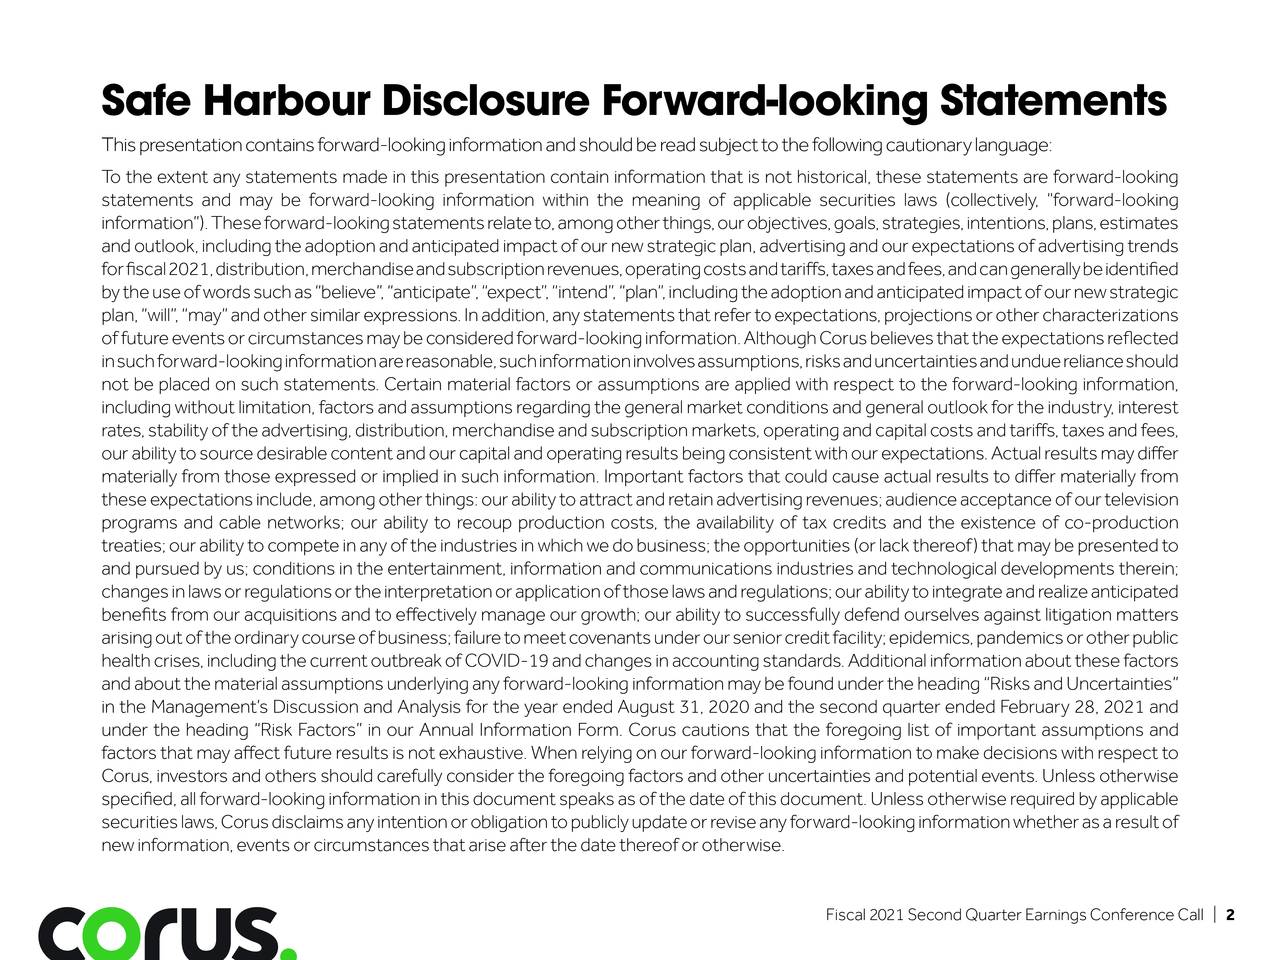 Safe Harbour Disclosure Forward-looking Statements